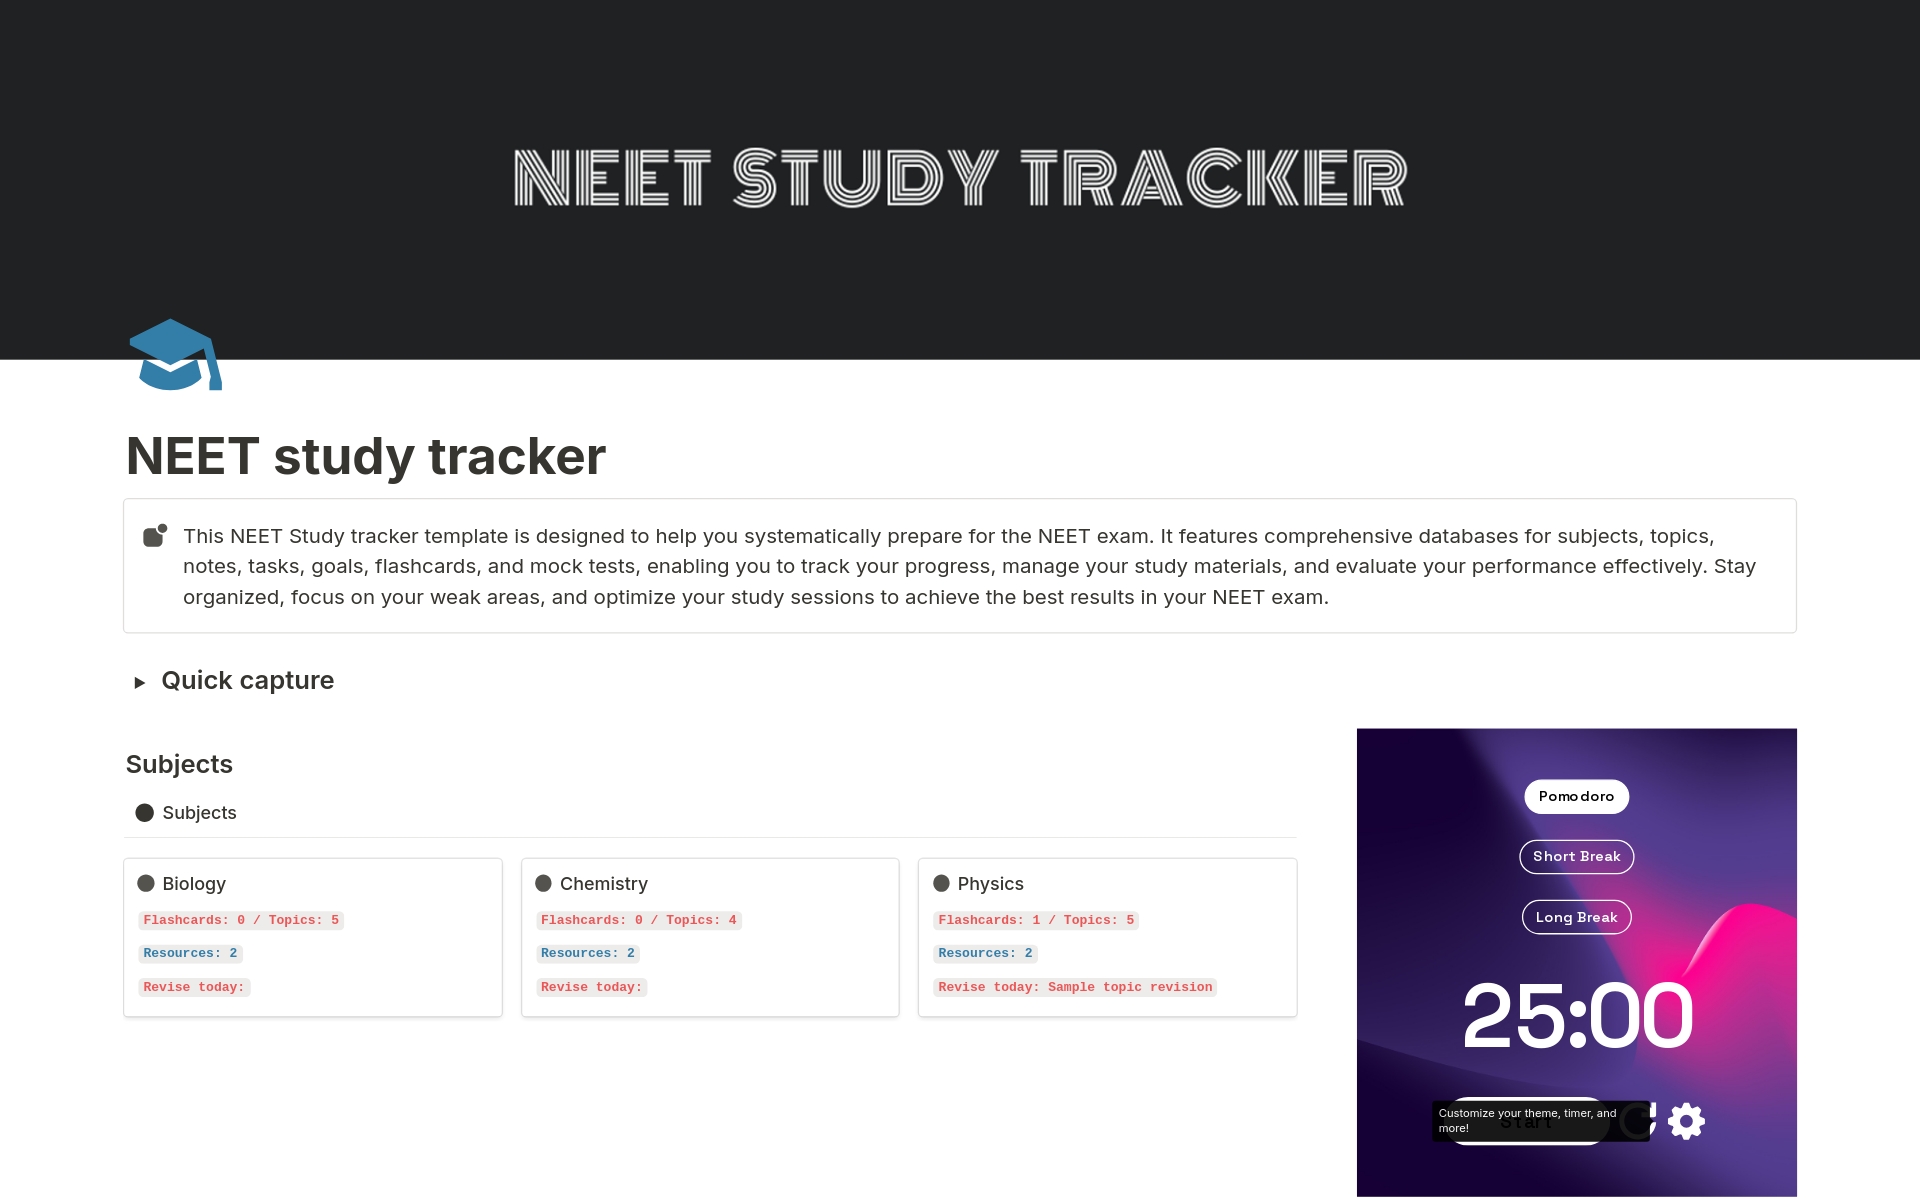 This template features comprehensive databases for subjects, topics, notes, tasks, goals, flashcards, and mock tests, enabling you to track your progress, manage your study materials, and evaluate your performance effectively.